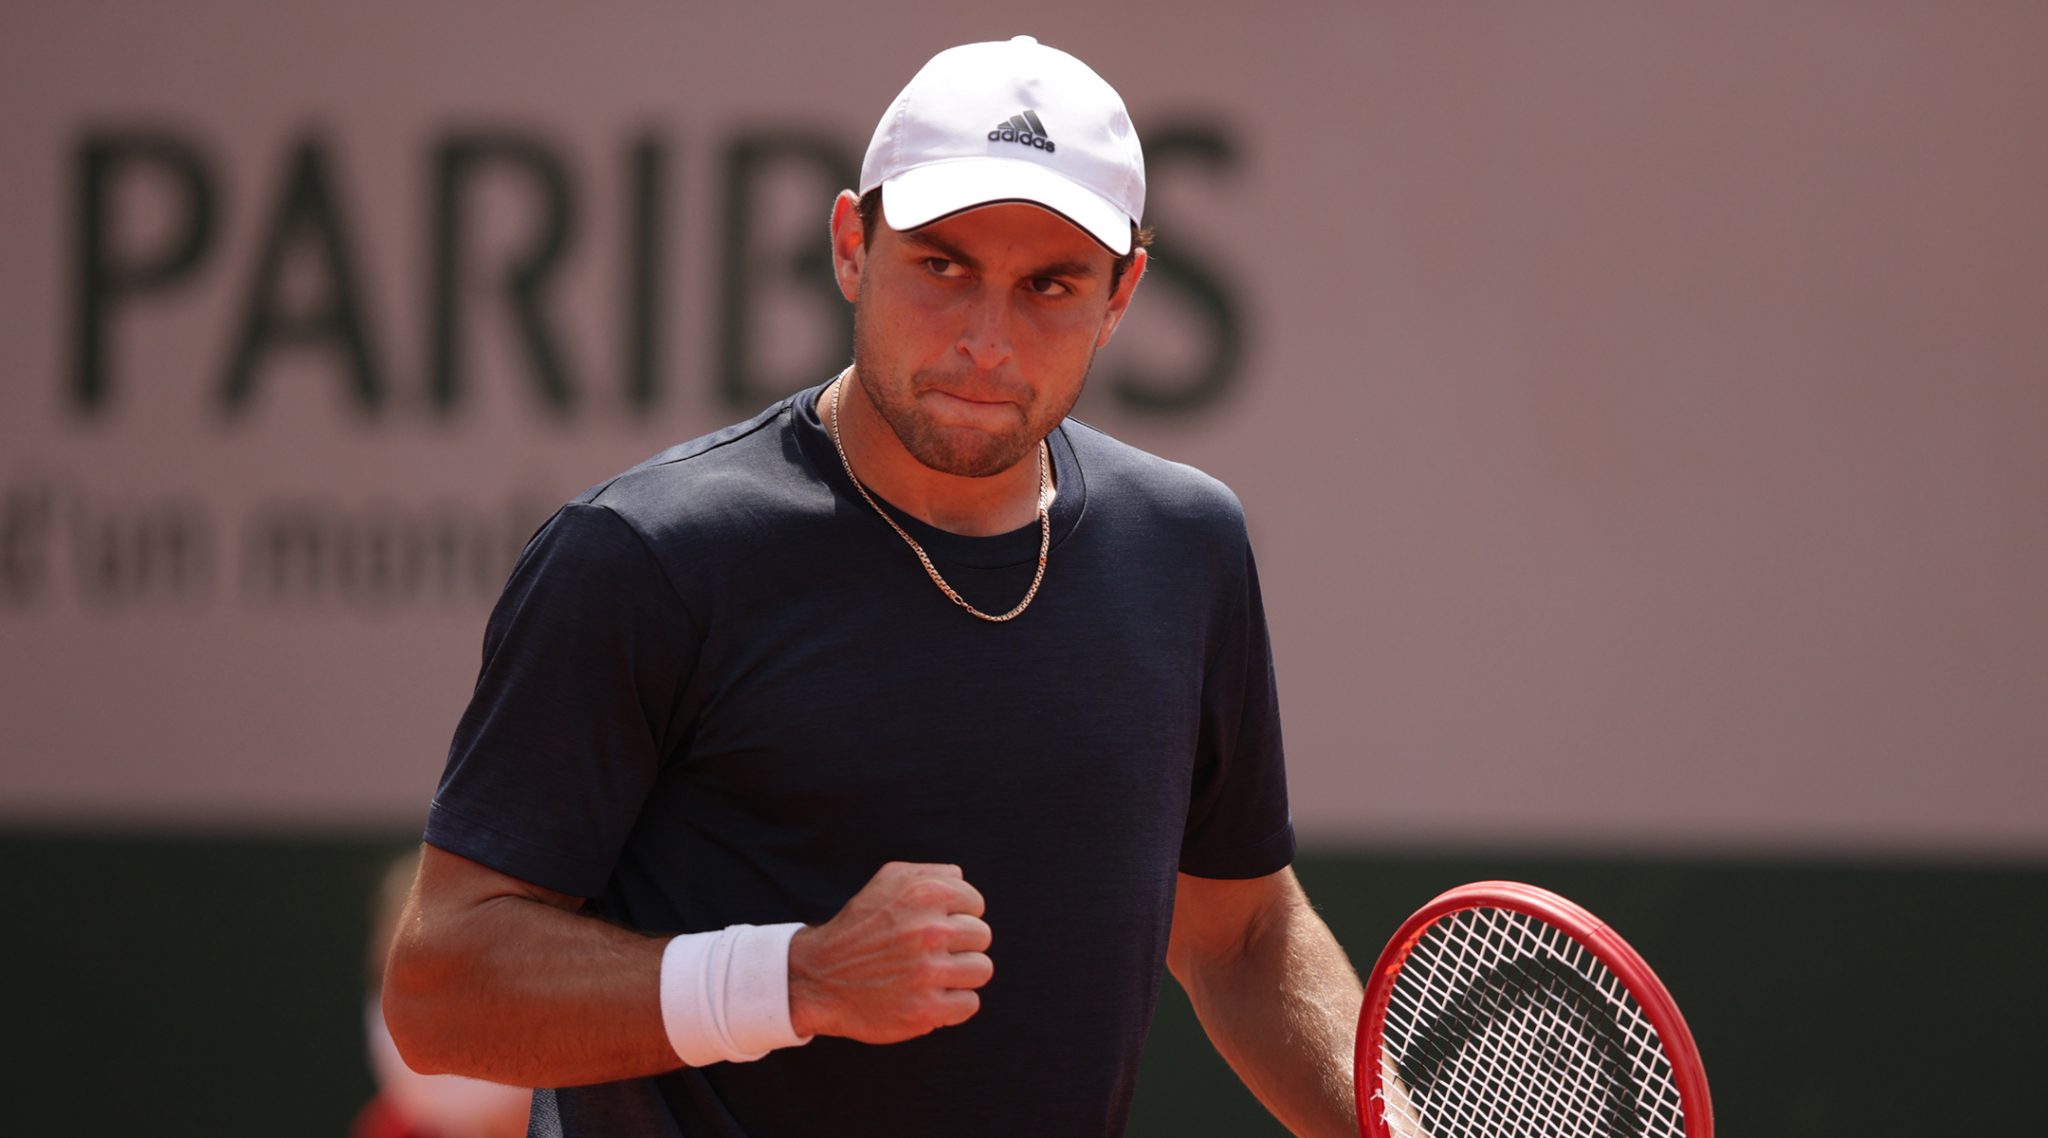 Russian-Israeli tennis player Karatsev reaches French Open mixed doubles final The Times of Israel